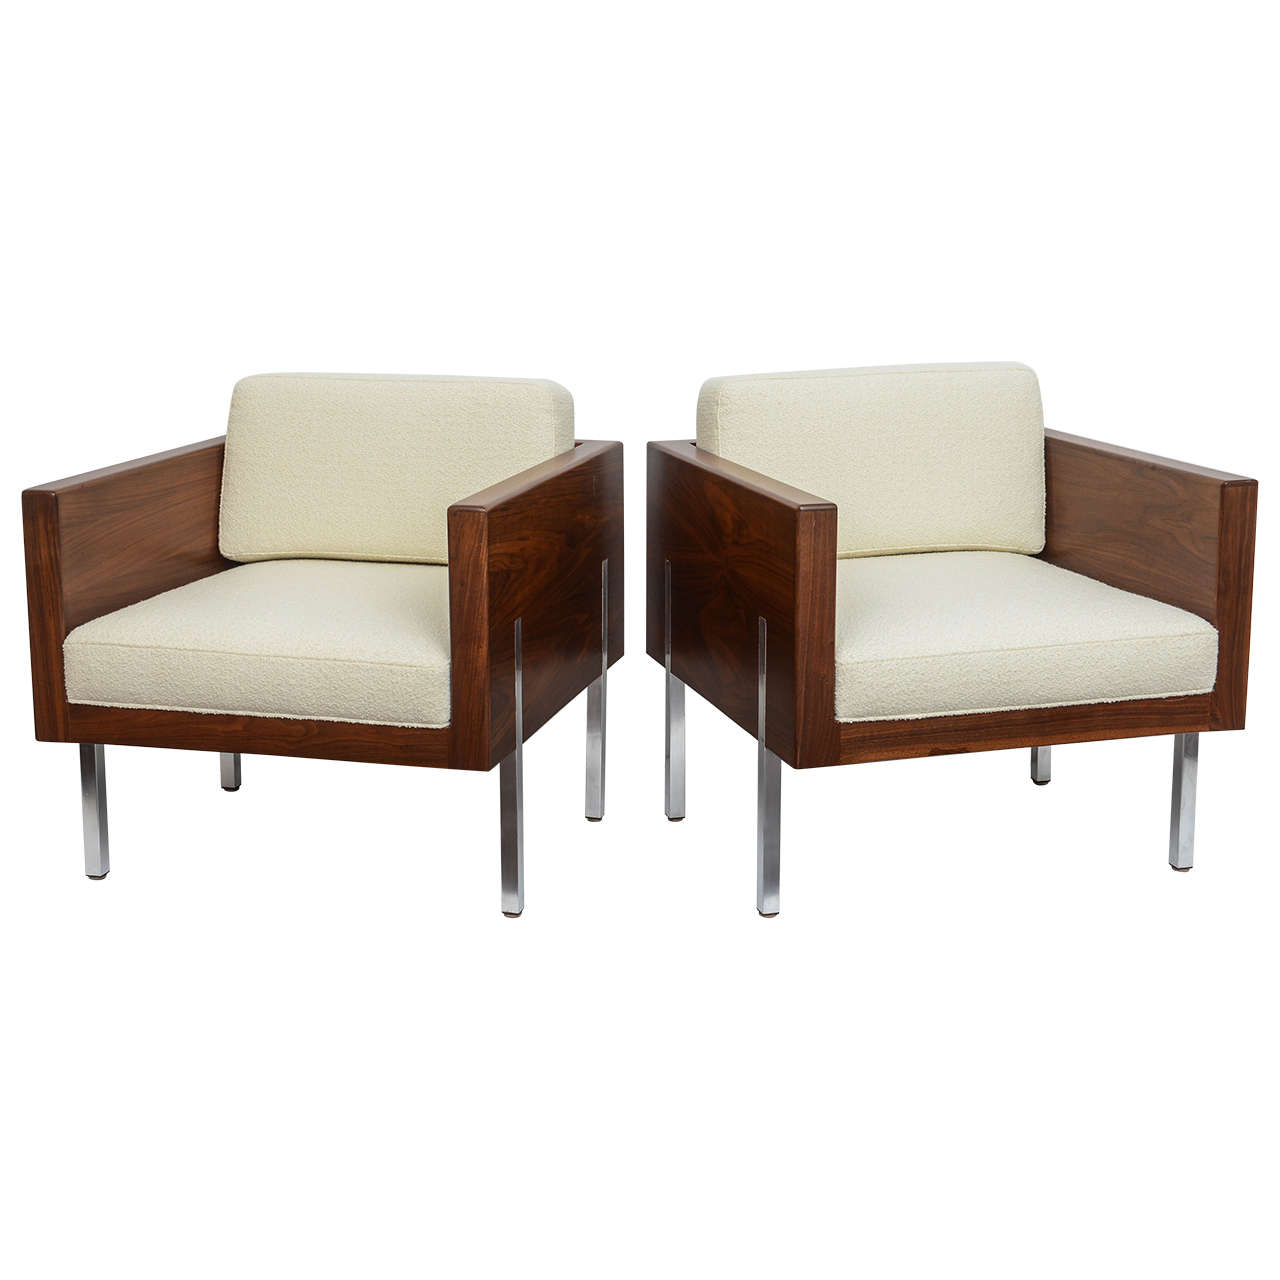 Handsome Pair of Rosewood Chairs Milo Baughman